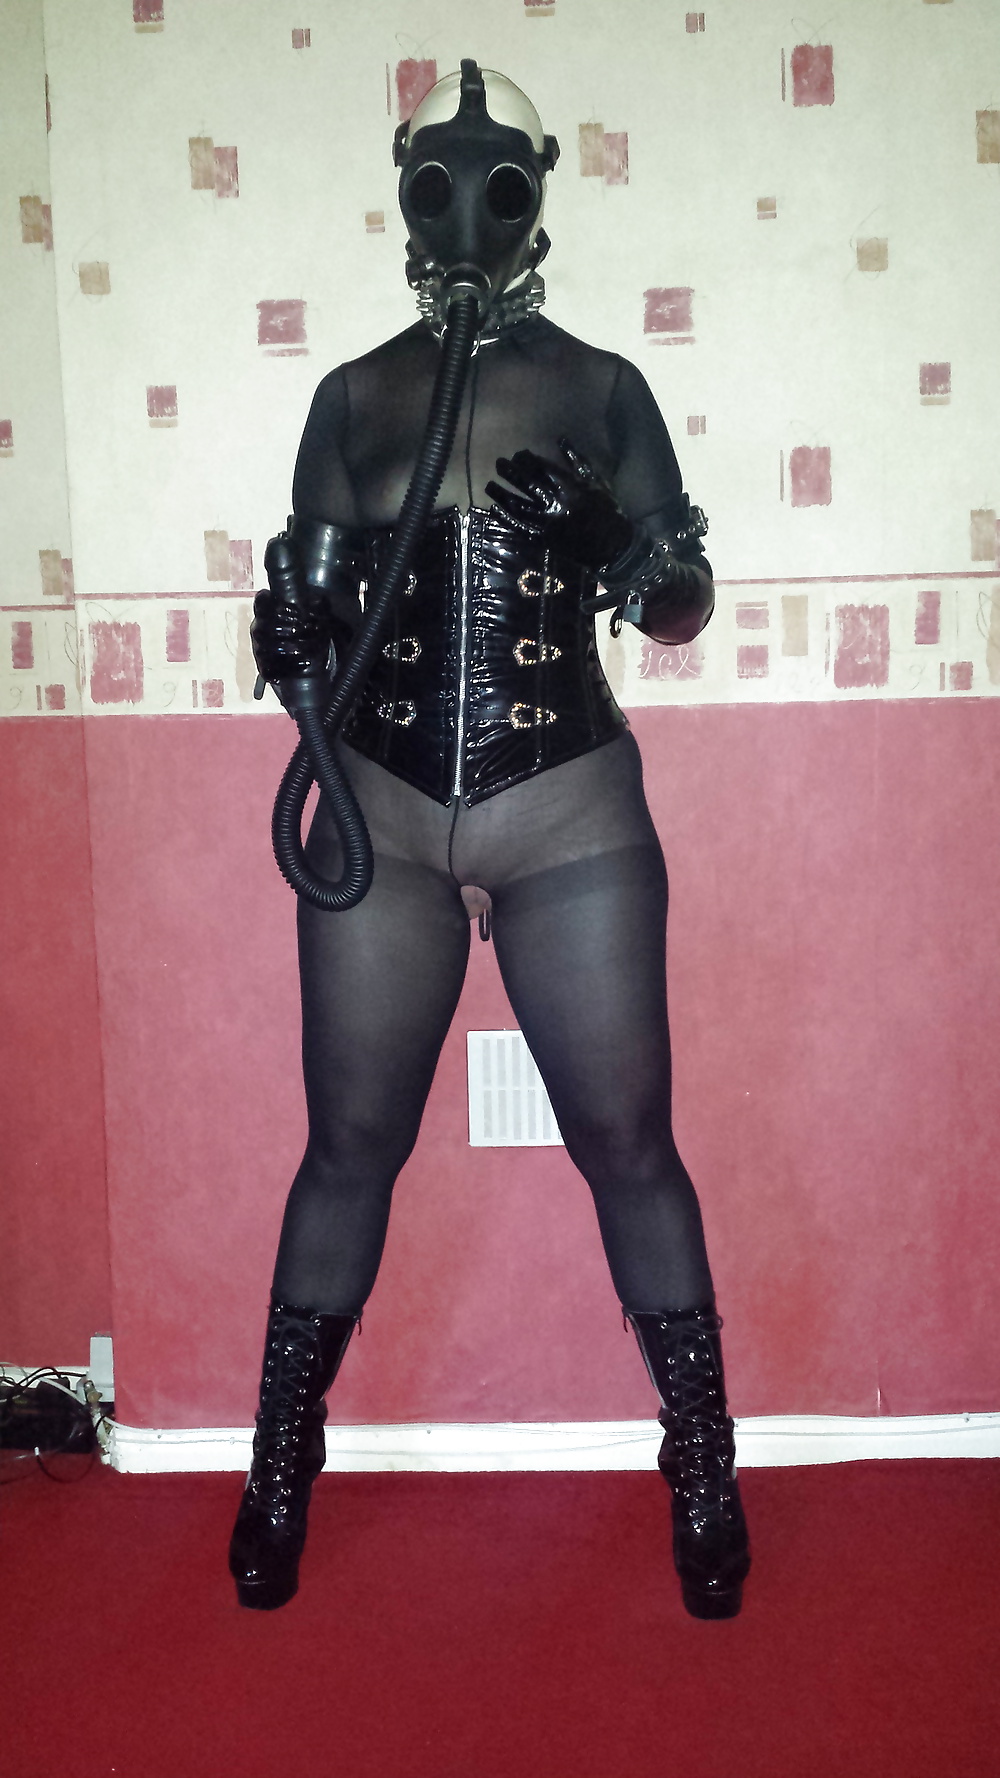 Slave girl in rubber gas mask and dildo hose